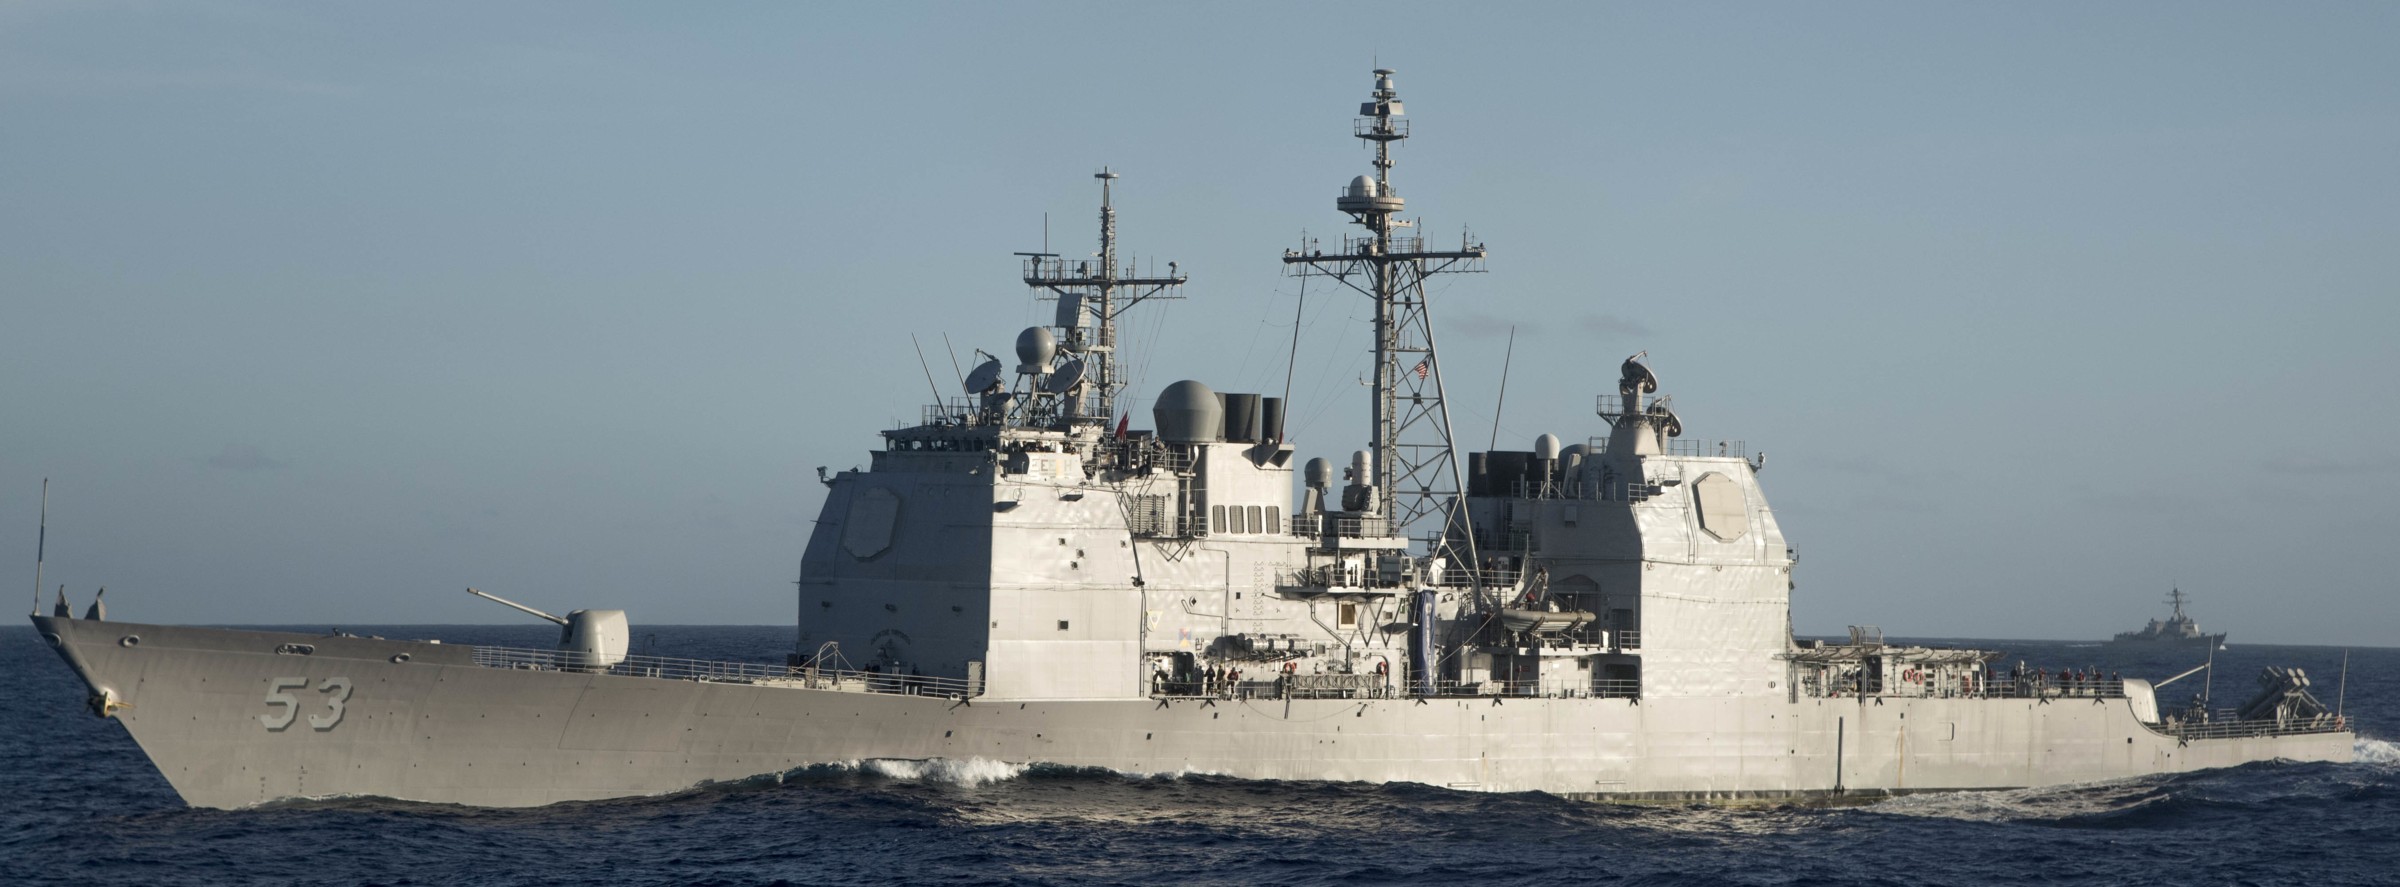 cg-53 uss mobile bay ticonderoga class guided missile cruiser aegis us navy 88